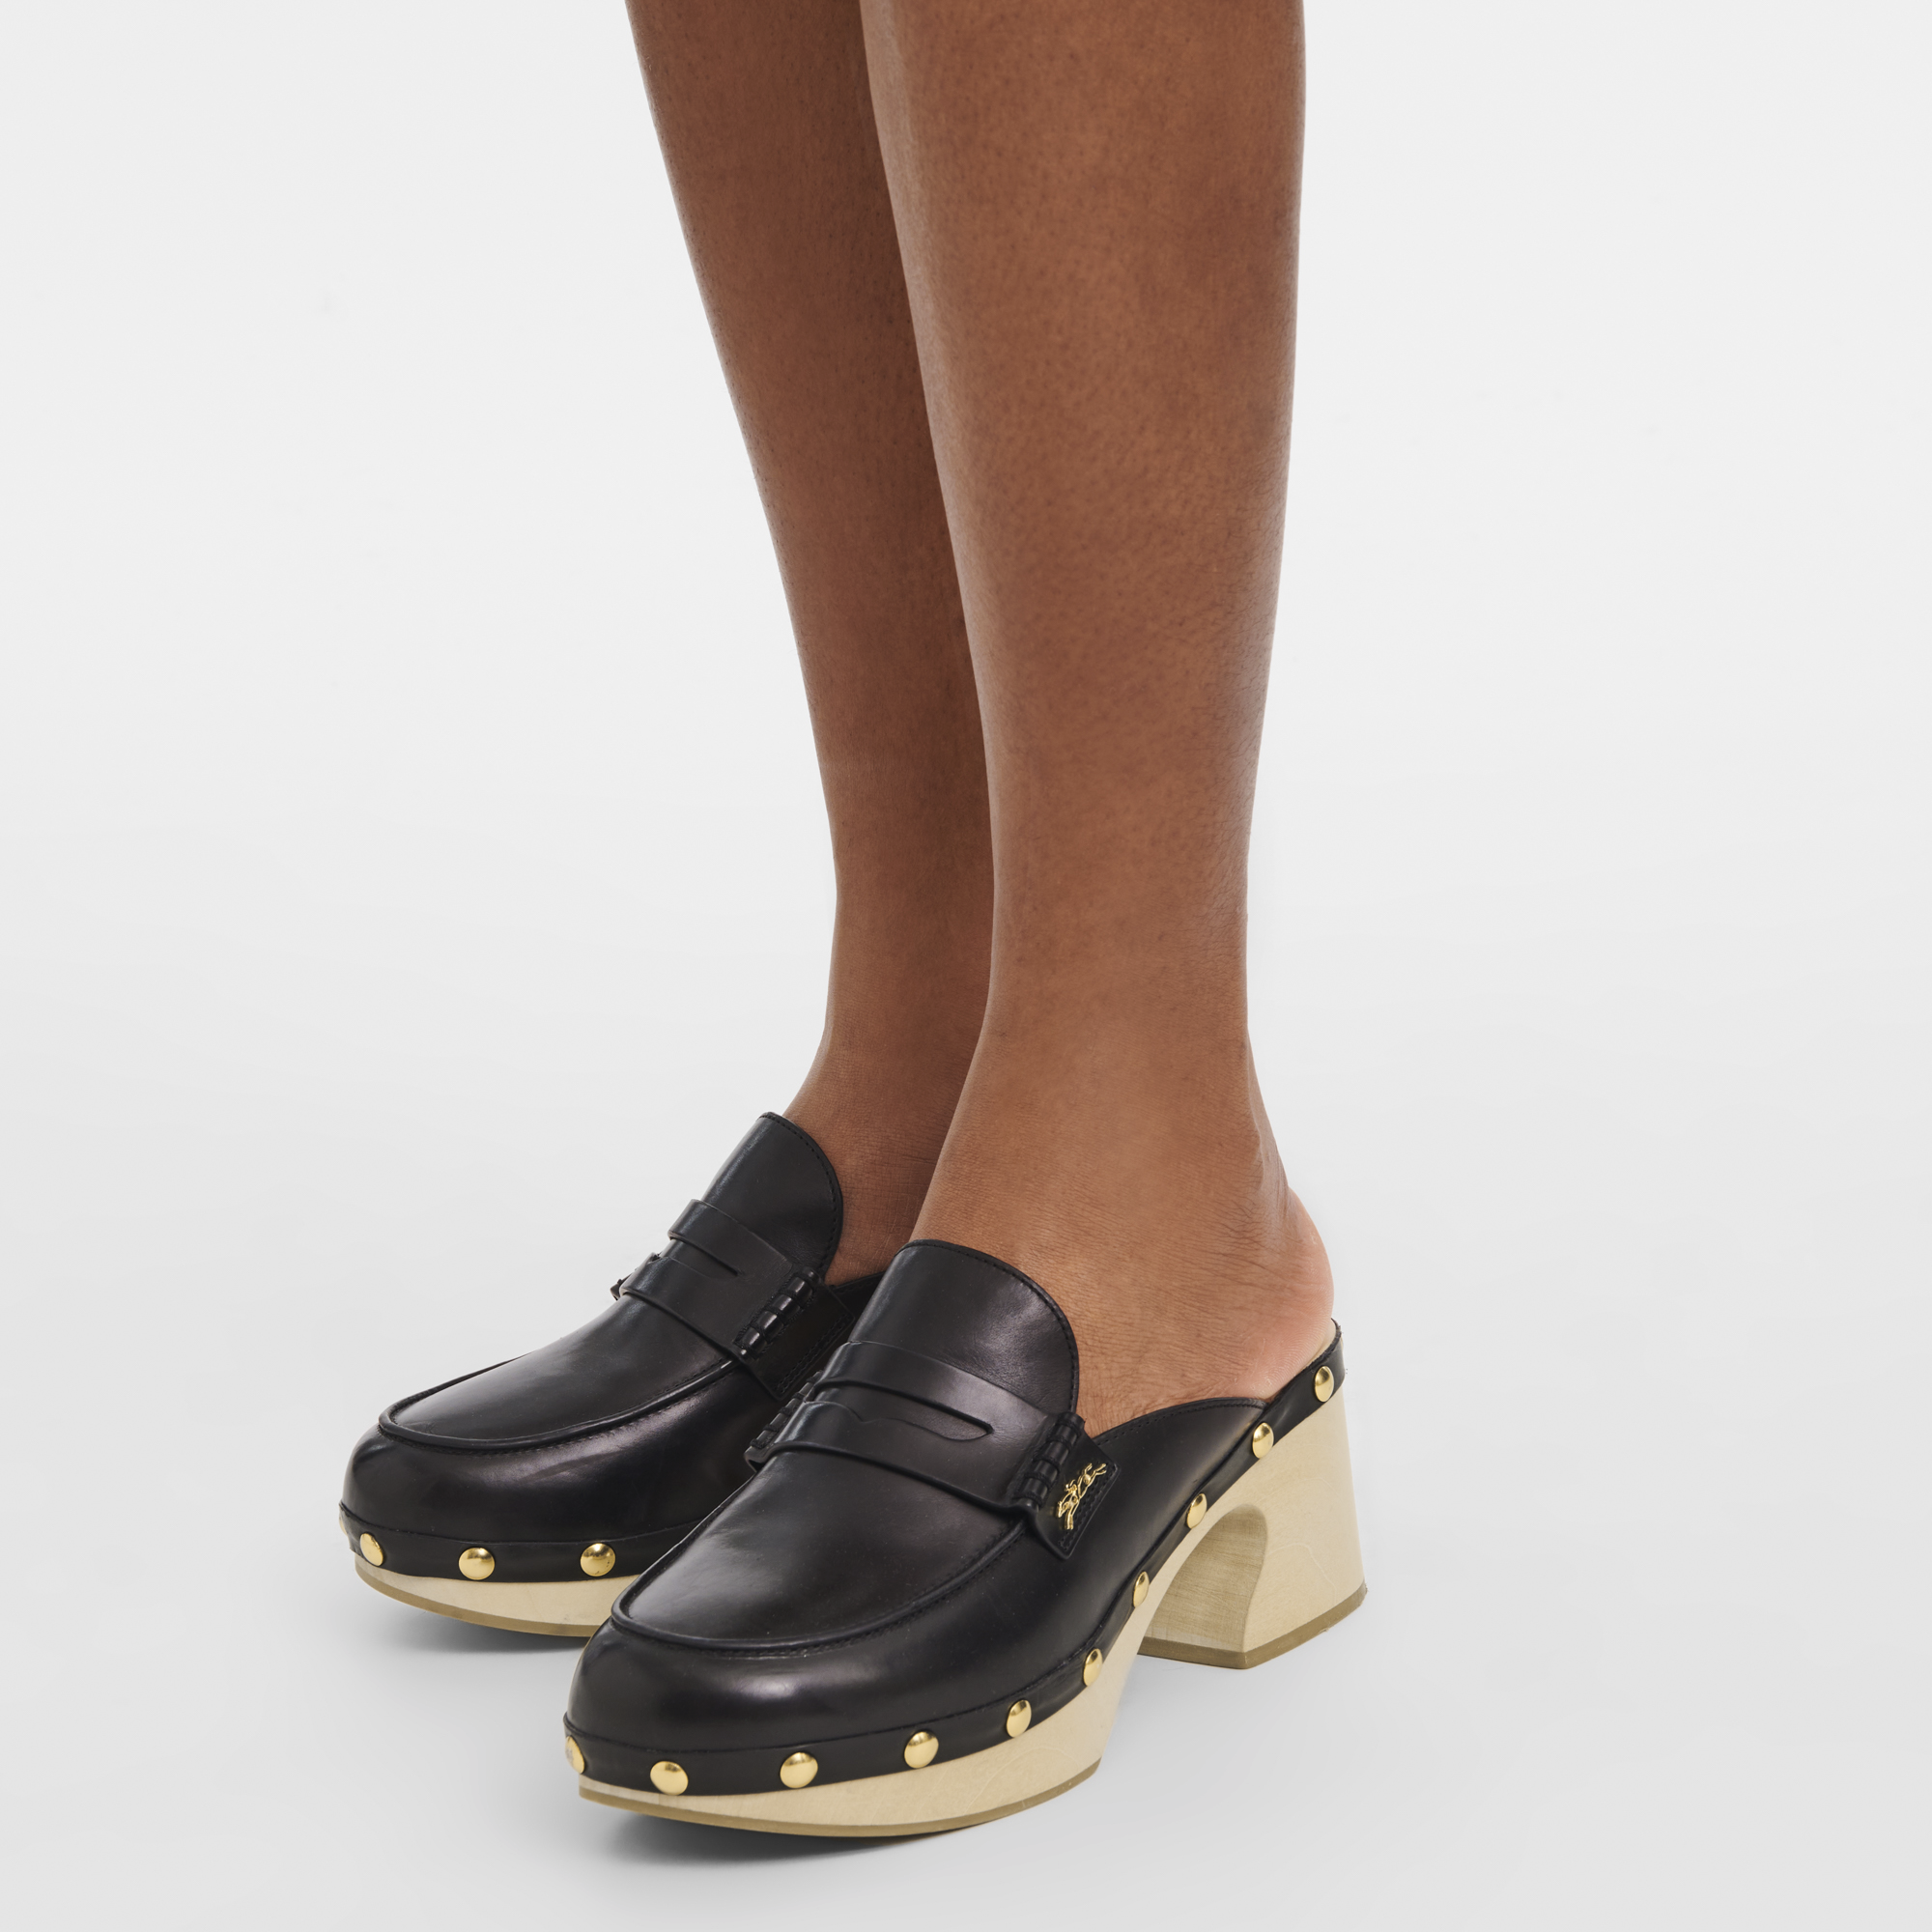 Leather Clogs Black Closed Heel, Comfortable Though Fashionable |  Netherlands Souvenirs